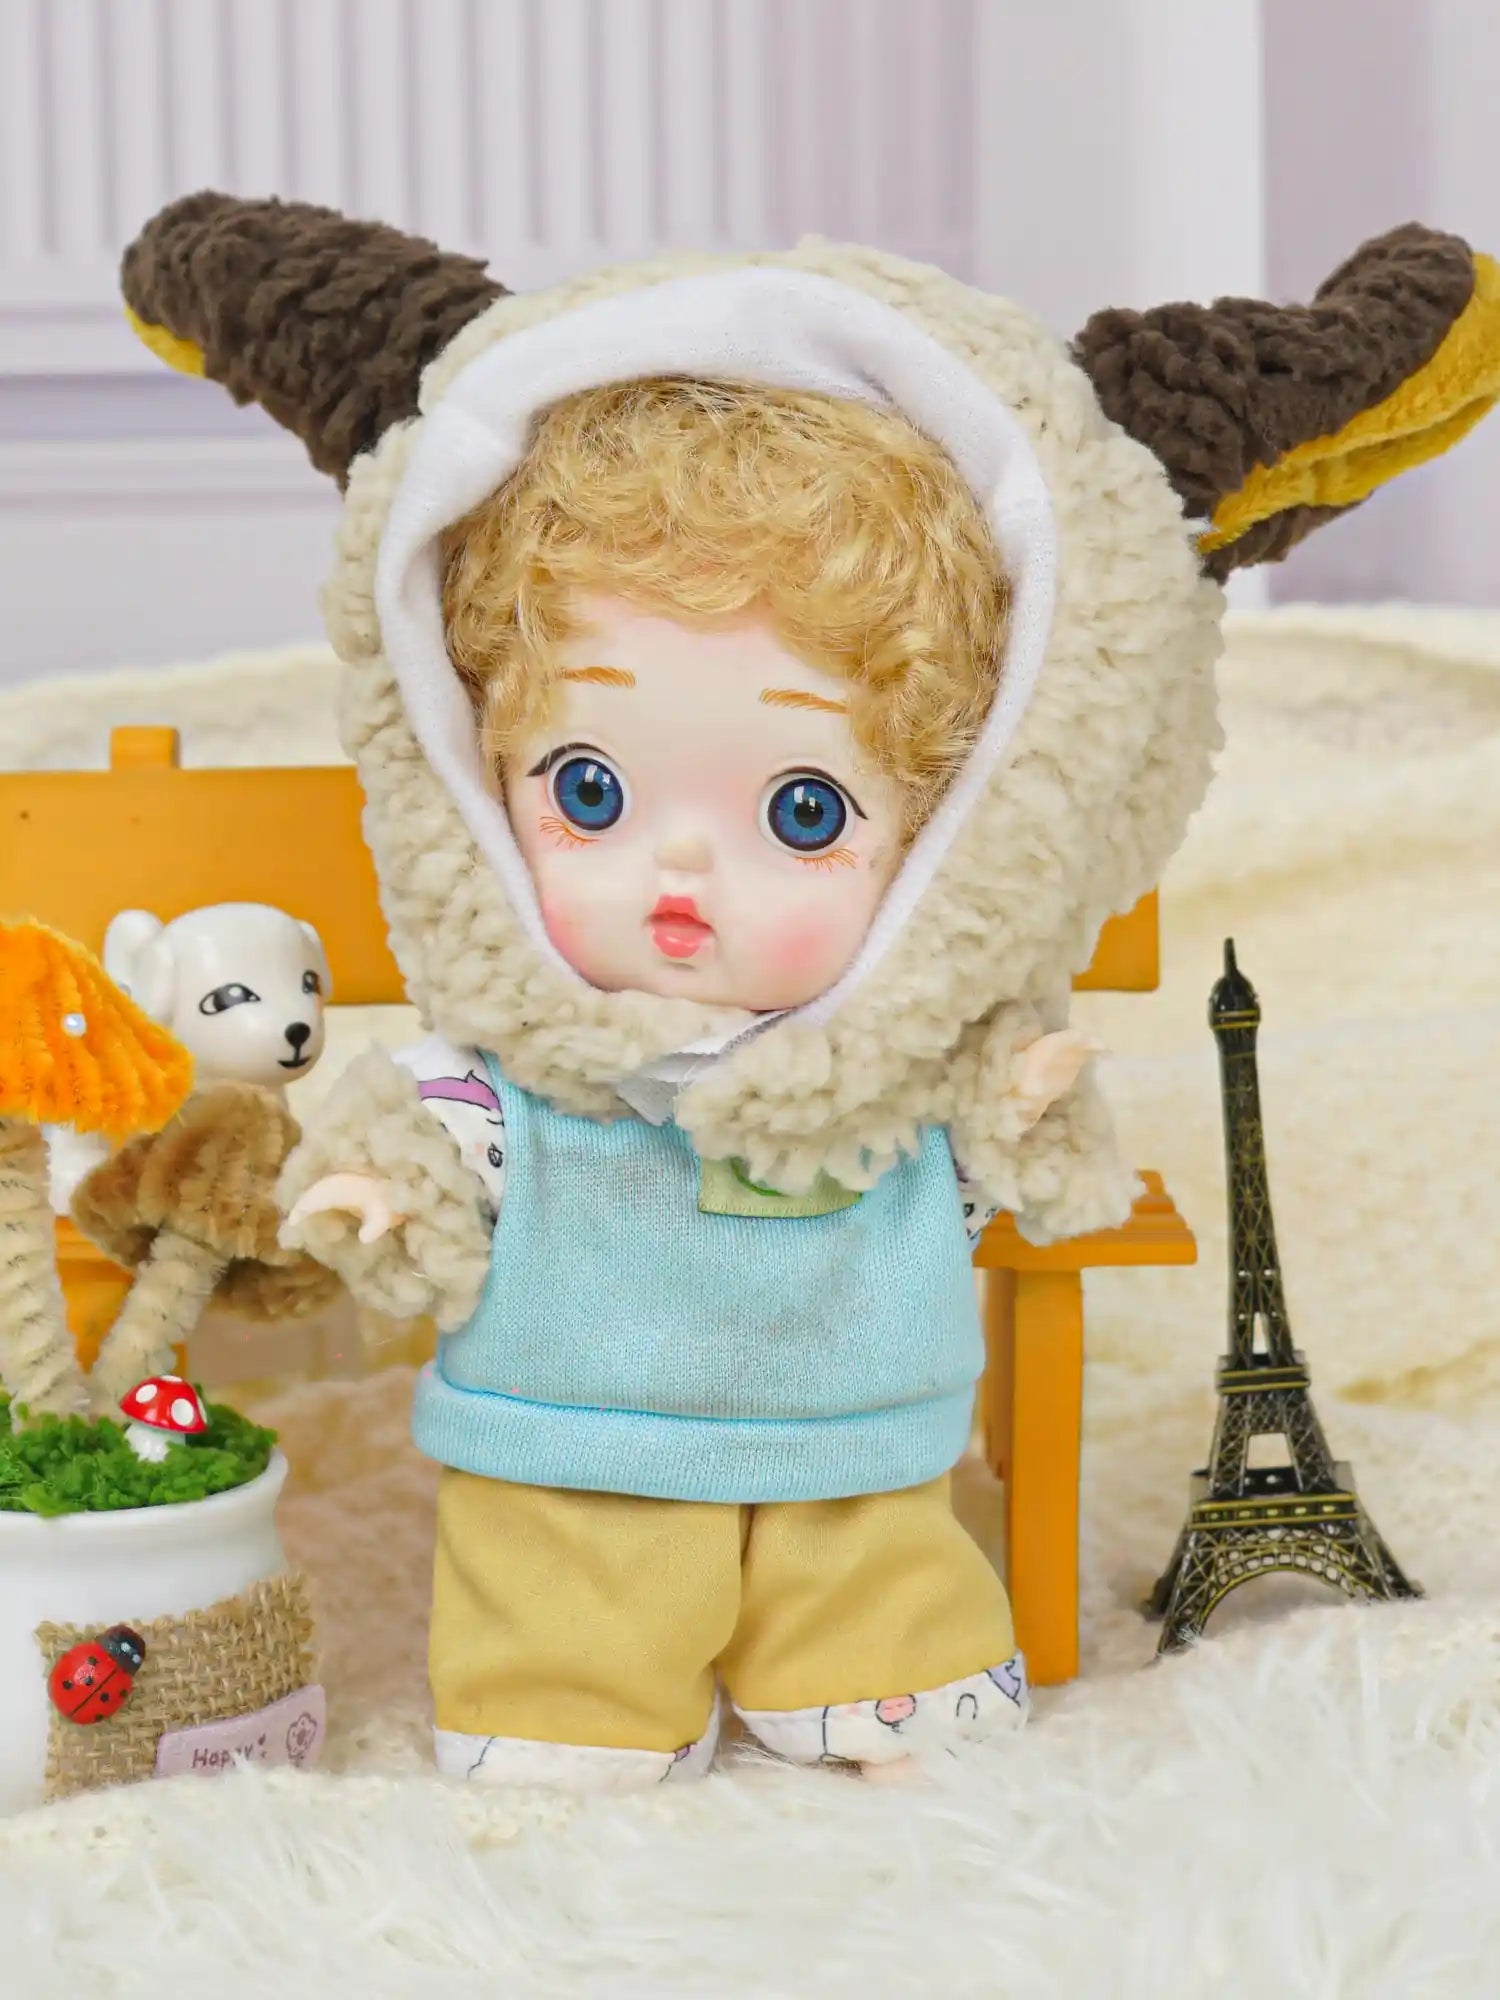 An expressive BJD dressed in a whimsical lamb hooded outfit, accompanied by playful miniature companions.